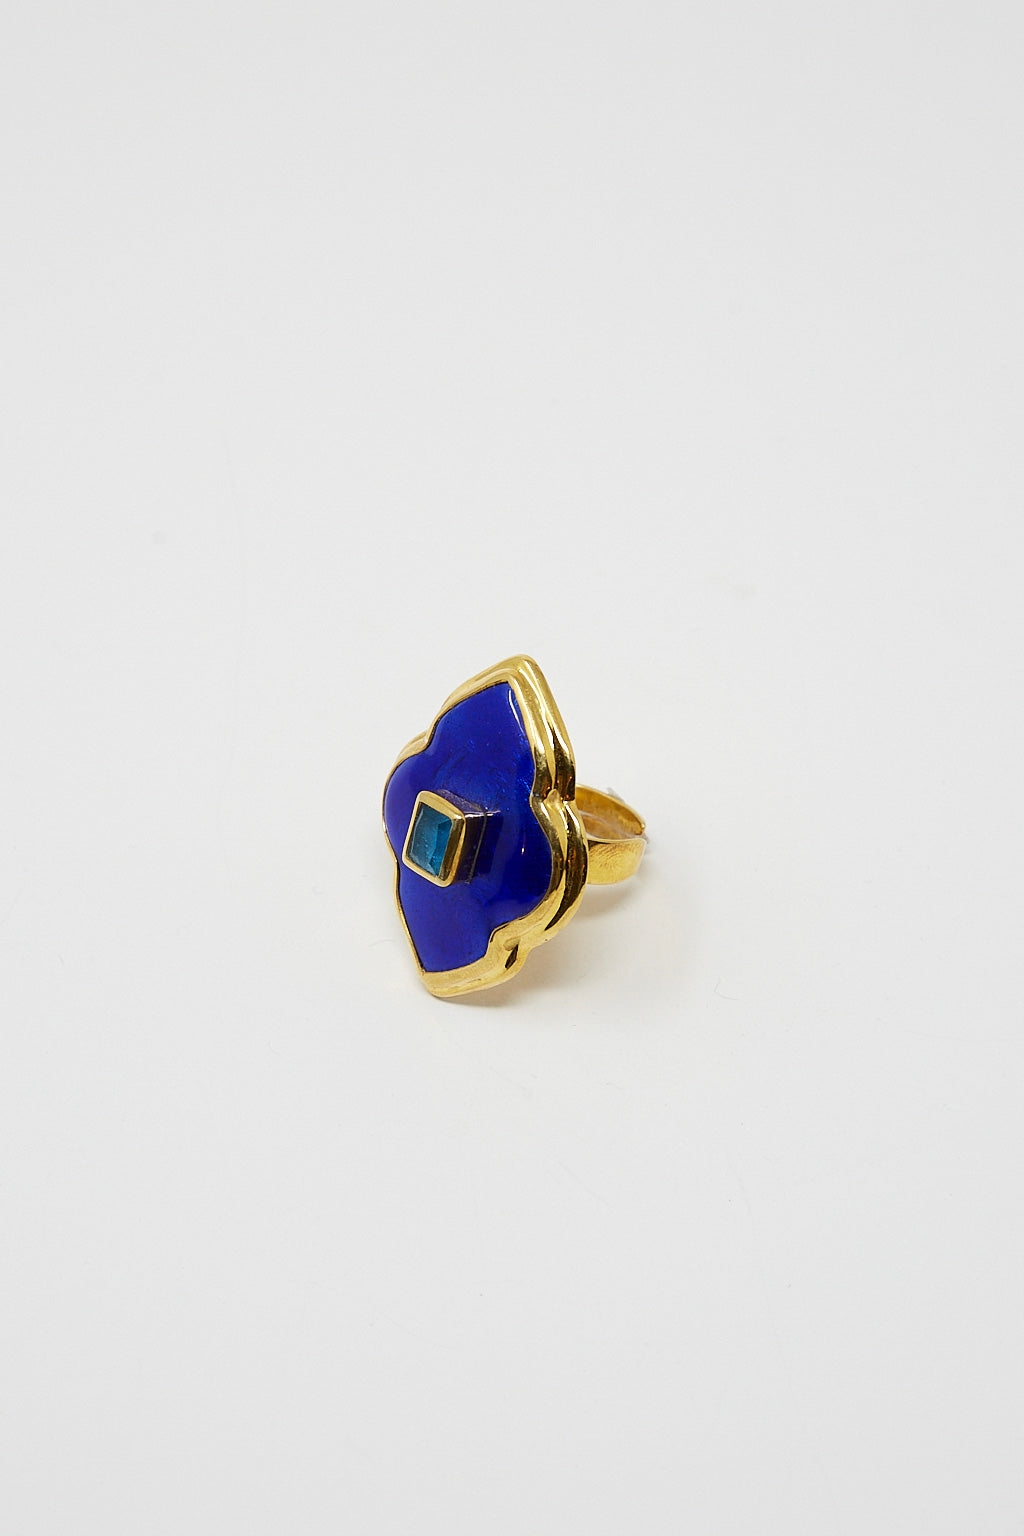 A Sofio Gongli ring with a cloisonné enamel design featuring a blue and green stone.